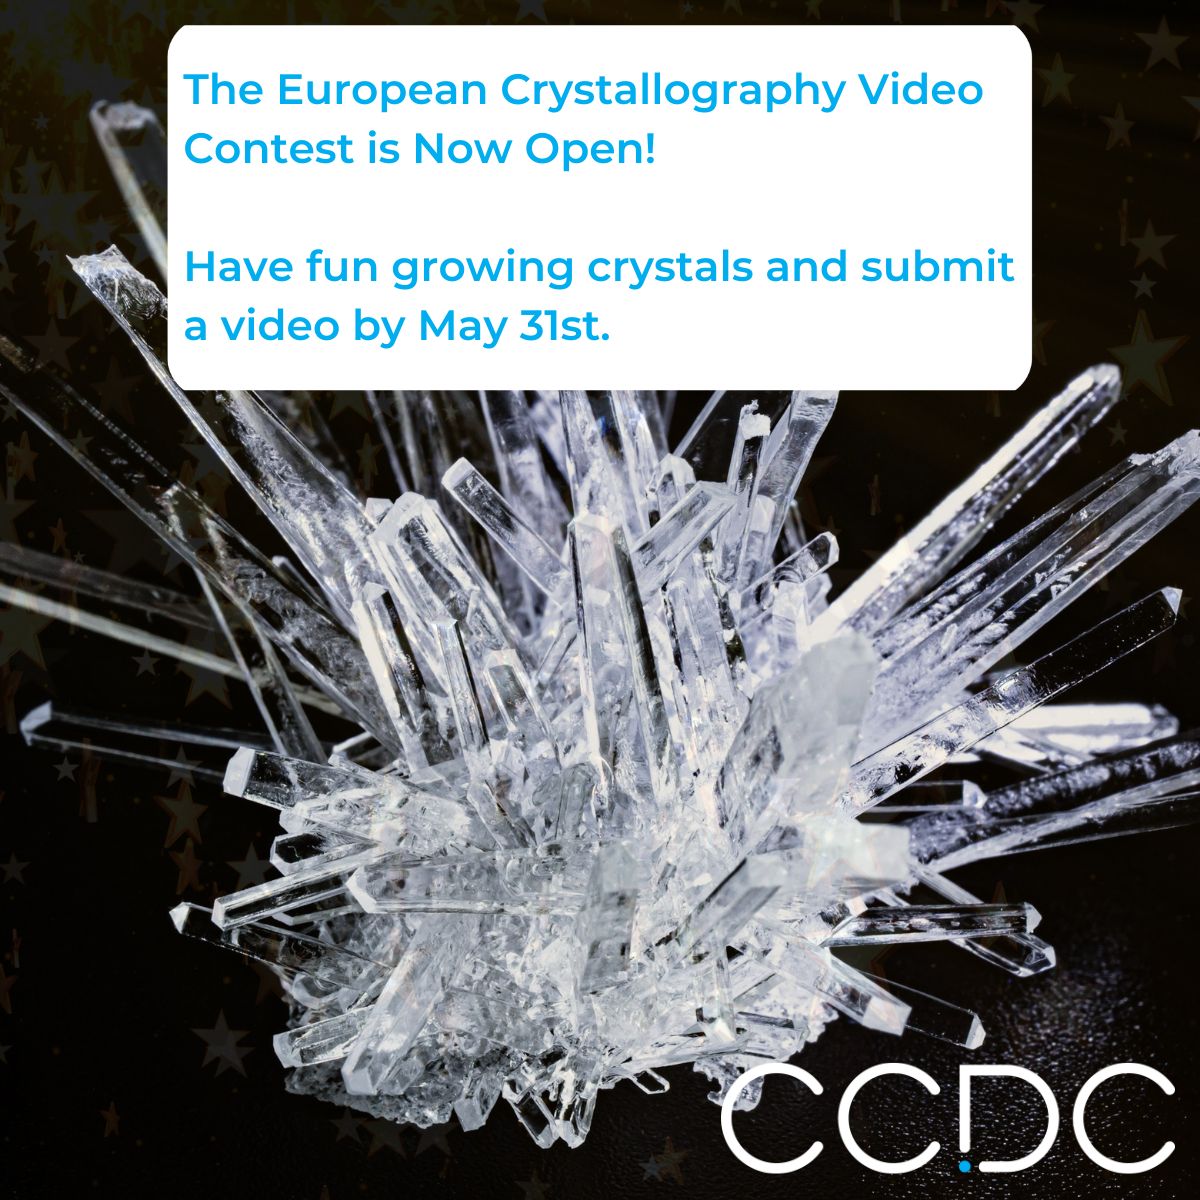 🔷 Calling all young minds across Europe! 🎥Grow some crystals and enter the European Crystallography Video Contest from @ECA_social (with support from a CCDC Engagement Grant). Deadline for entries is May 31st. ccdc-info.com/3xNVVJ3 #STEMeducation #Crystallography